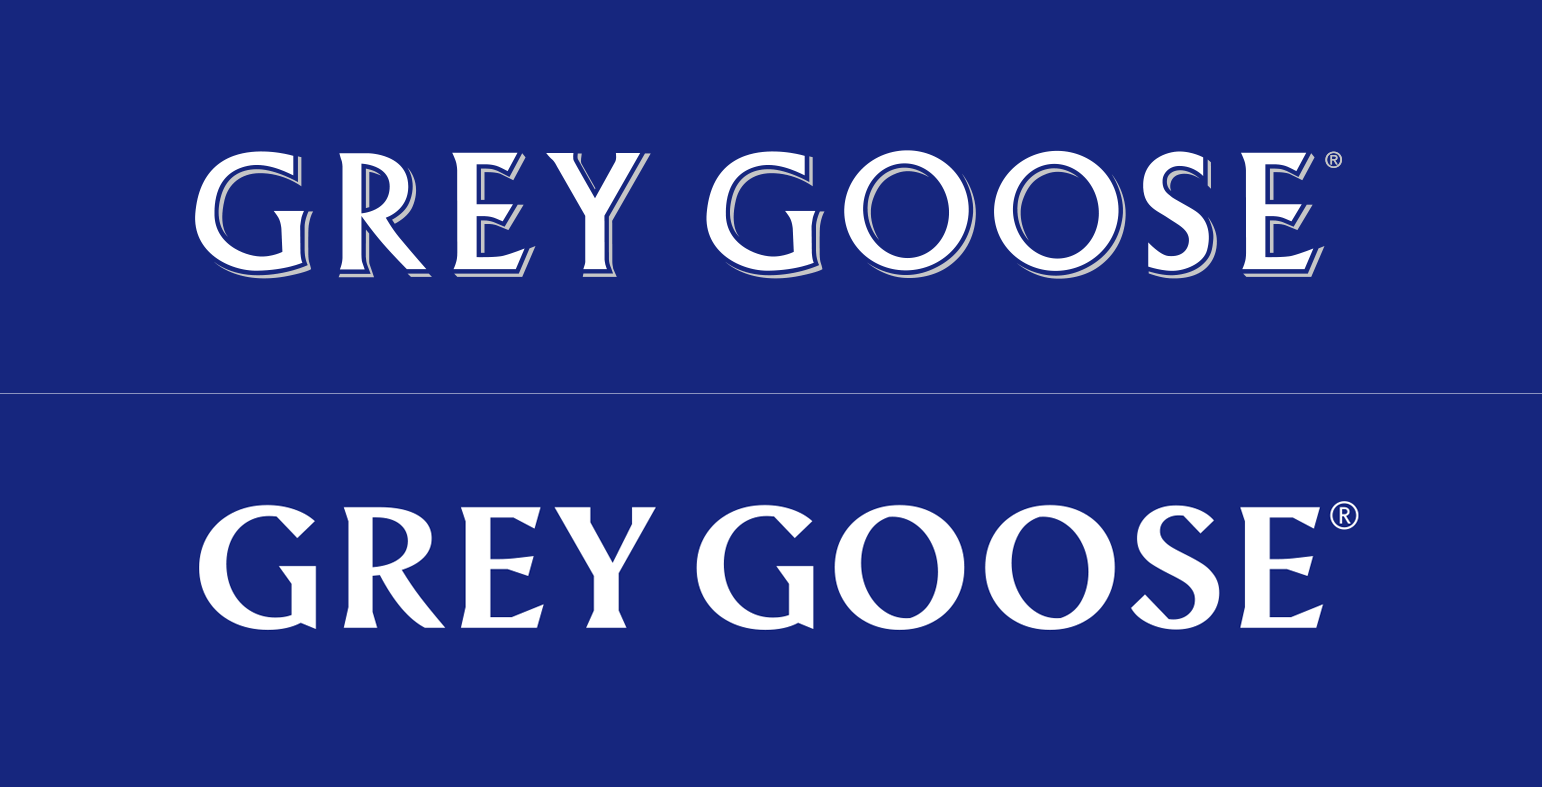 Grey Goose Redesign: 50ml of Minimalism and 1tsp of Flat Graphics